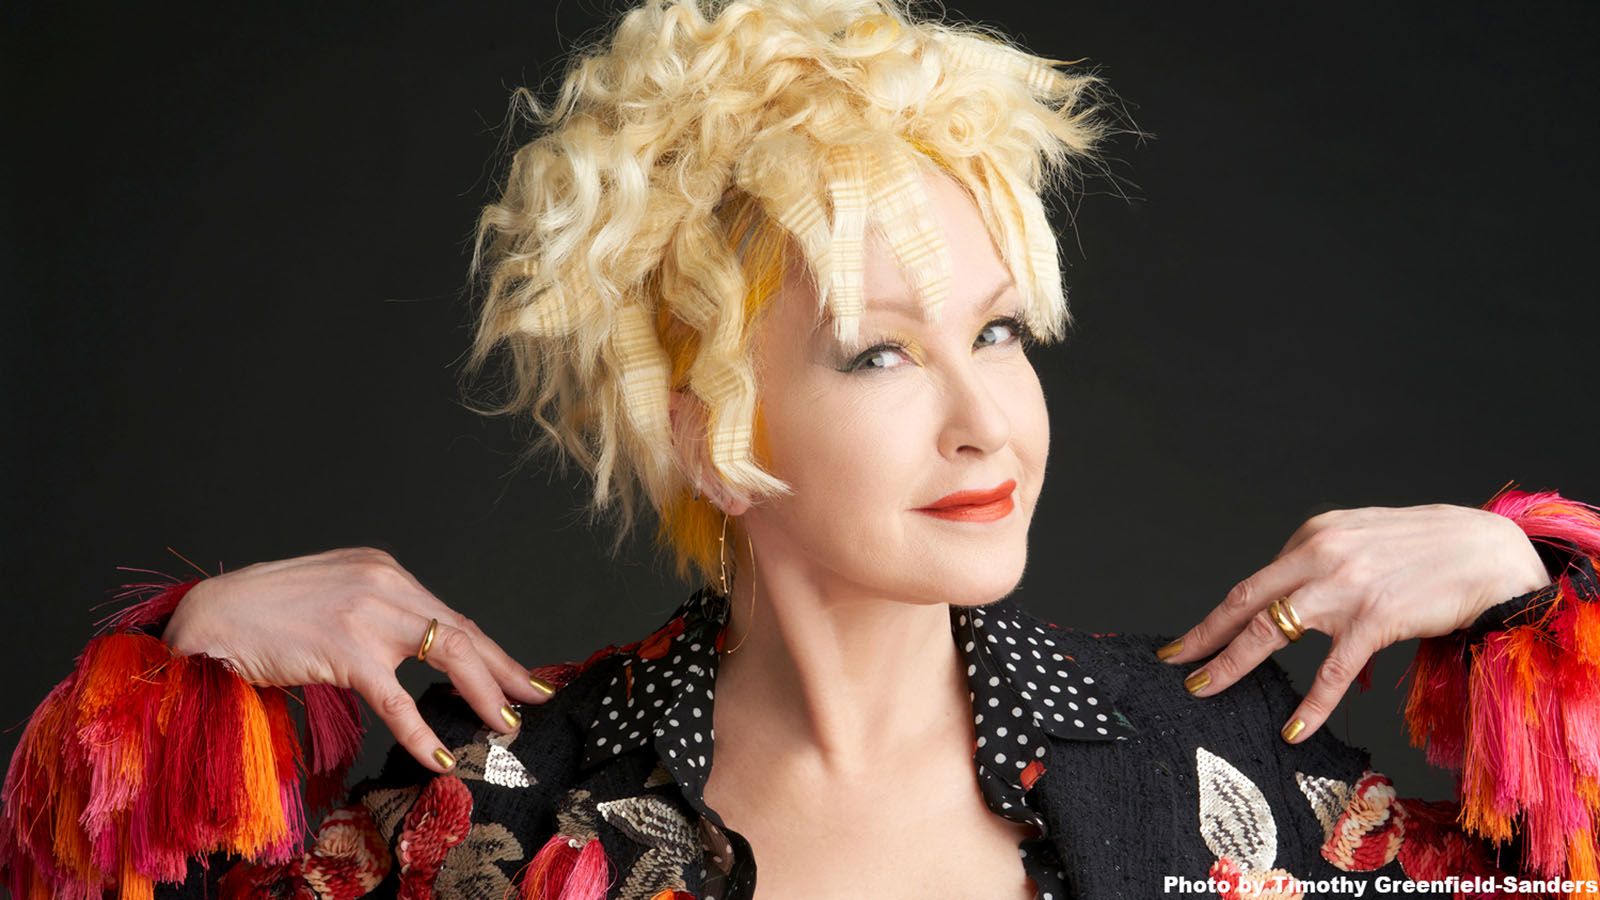 Cyndi Lauper says her next tour will be her last.